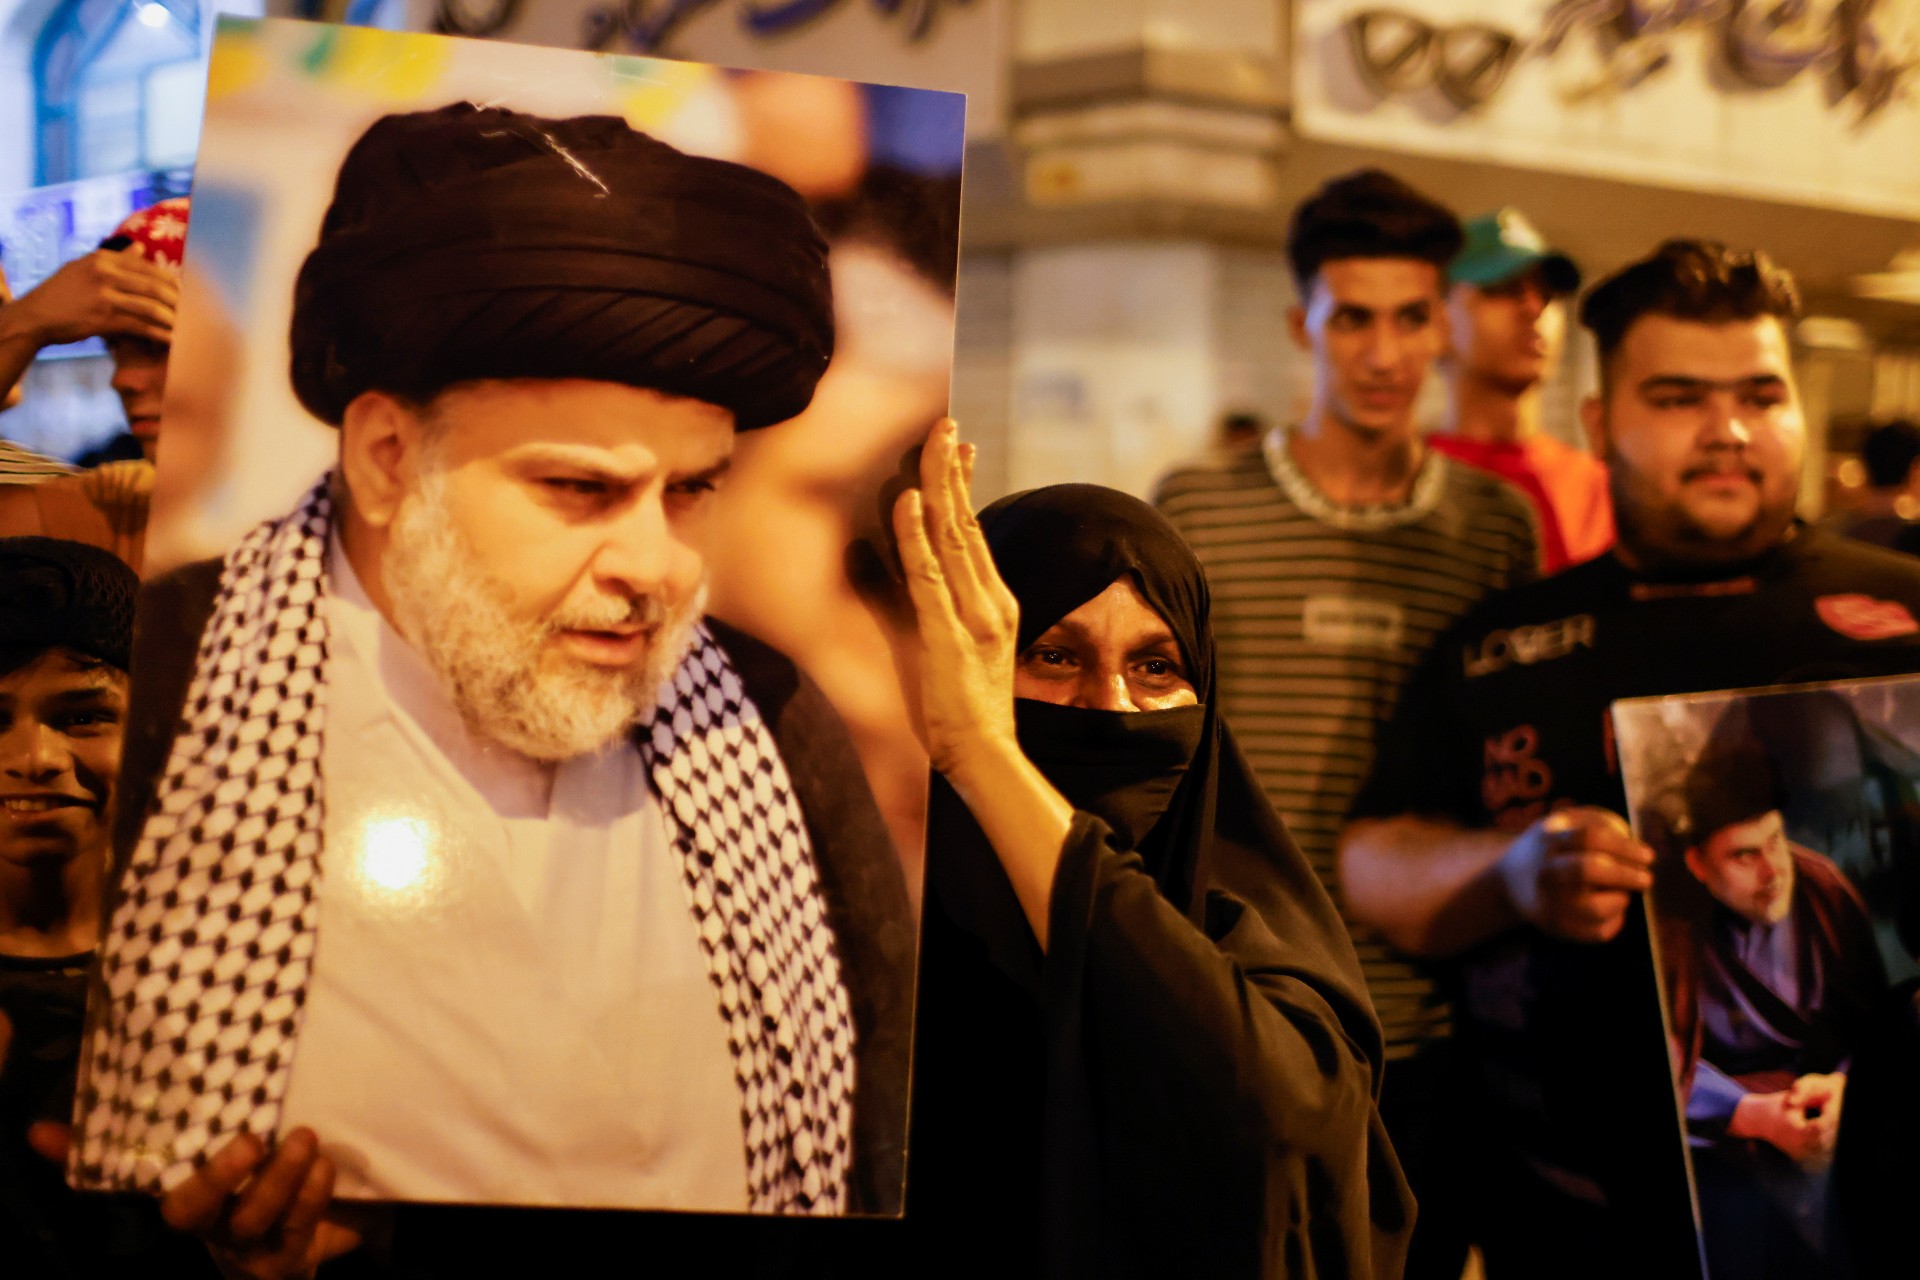 A woman holds a picture of Sadr's movement leader Moqtada al-Sadr, as his supporters celebrate after preliminary results of Iraq's parliamentary election were announced in Baghdad (Reuters)